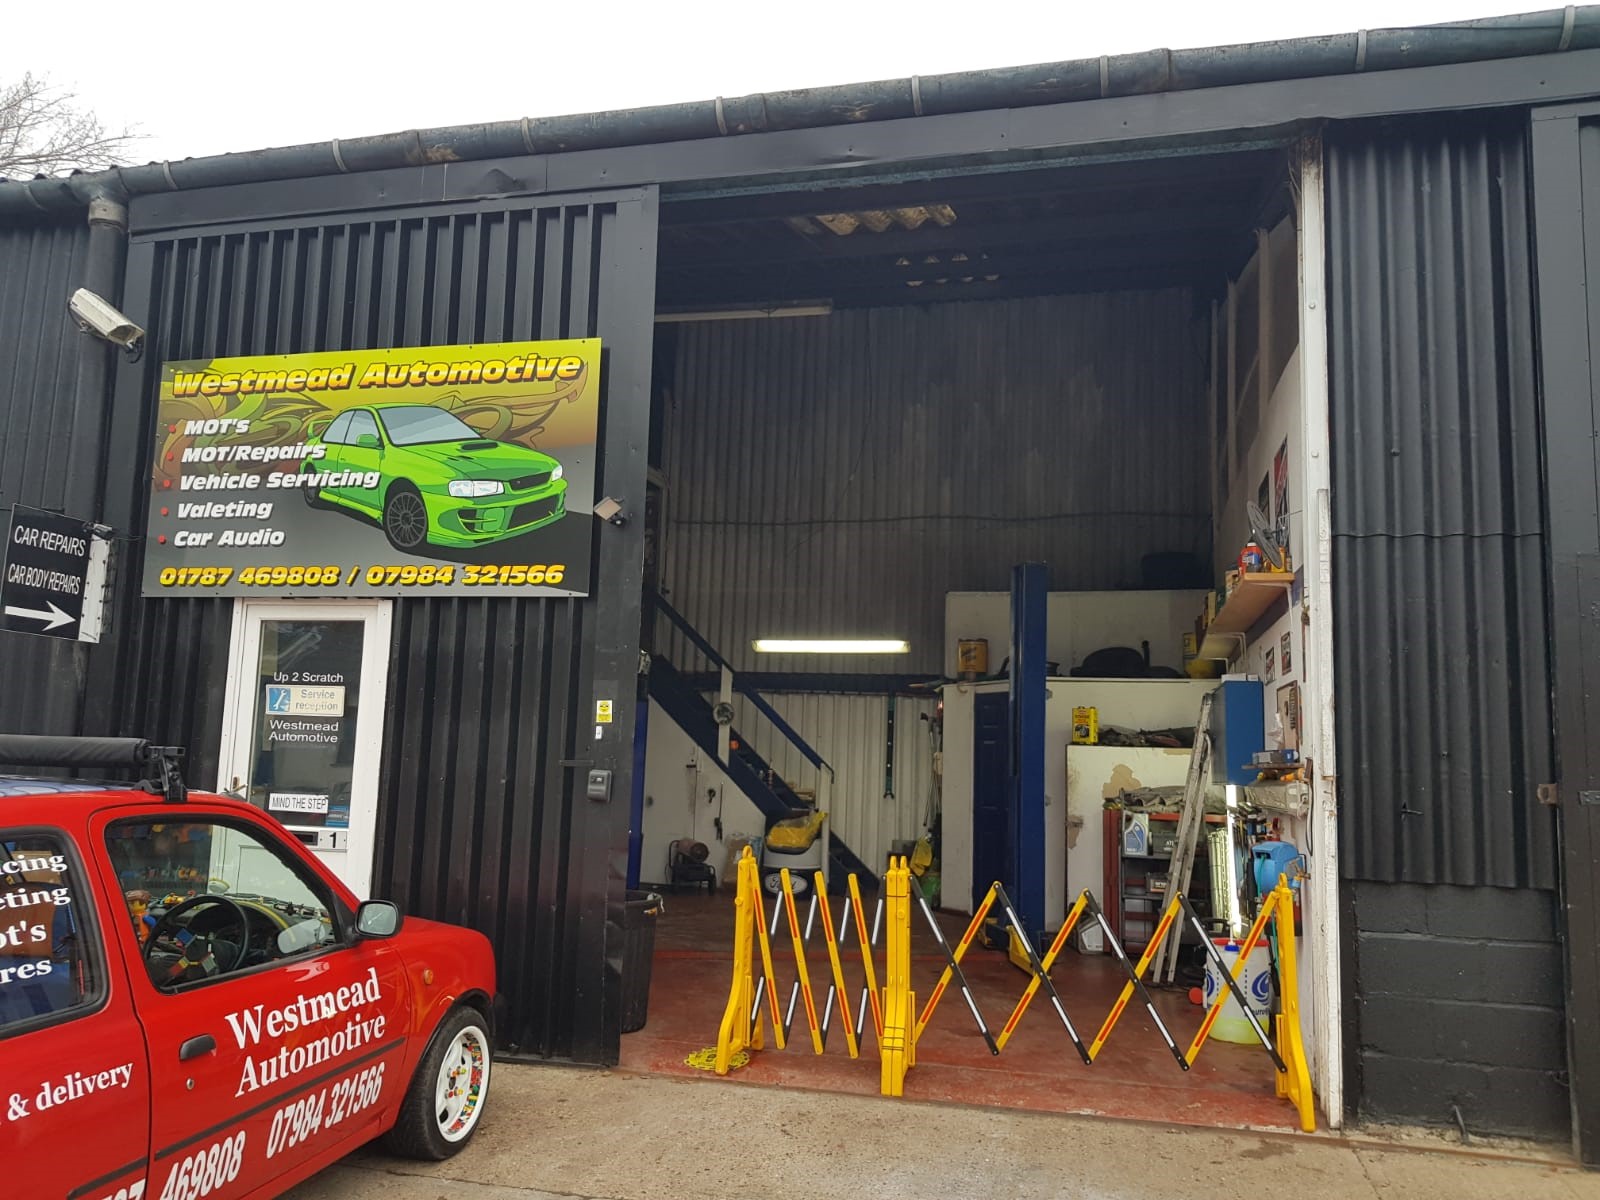 An image showing Westmead Automotive